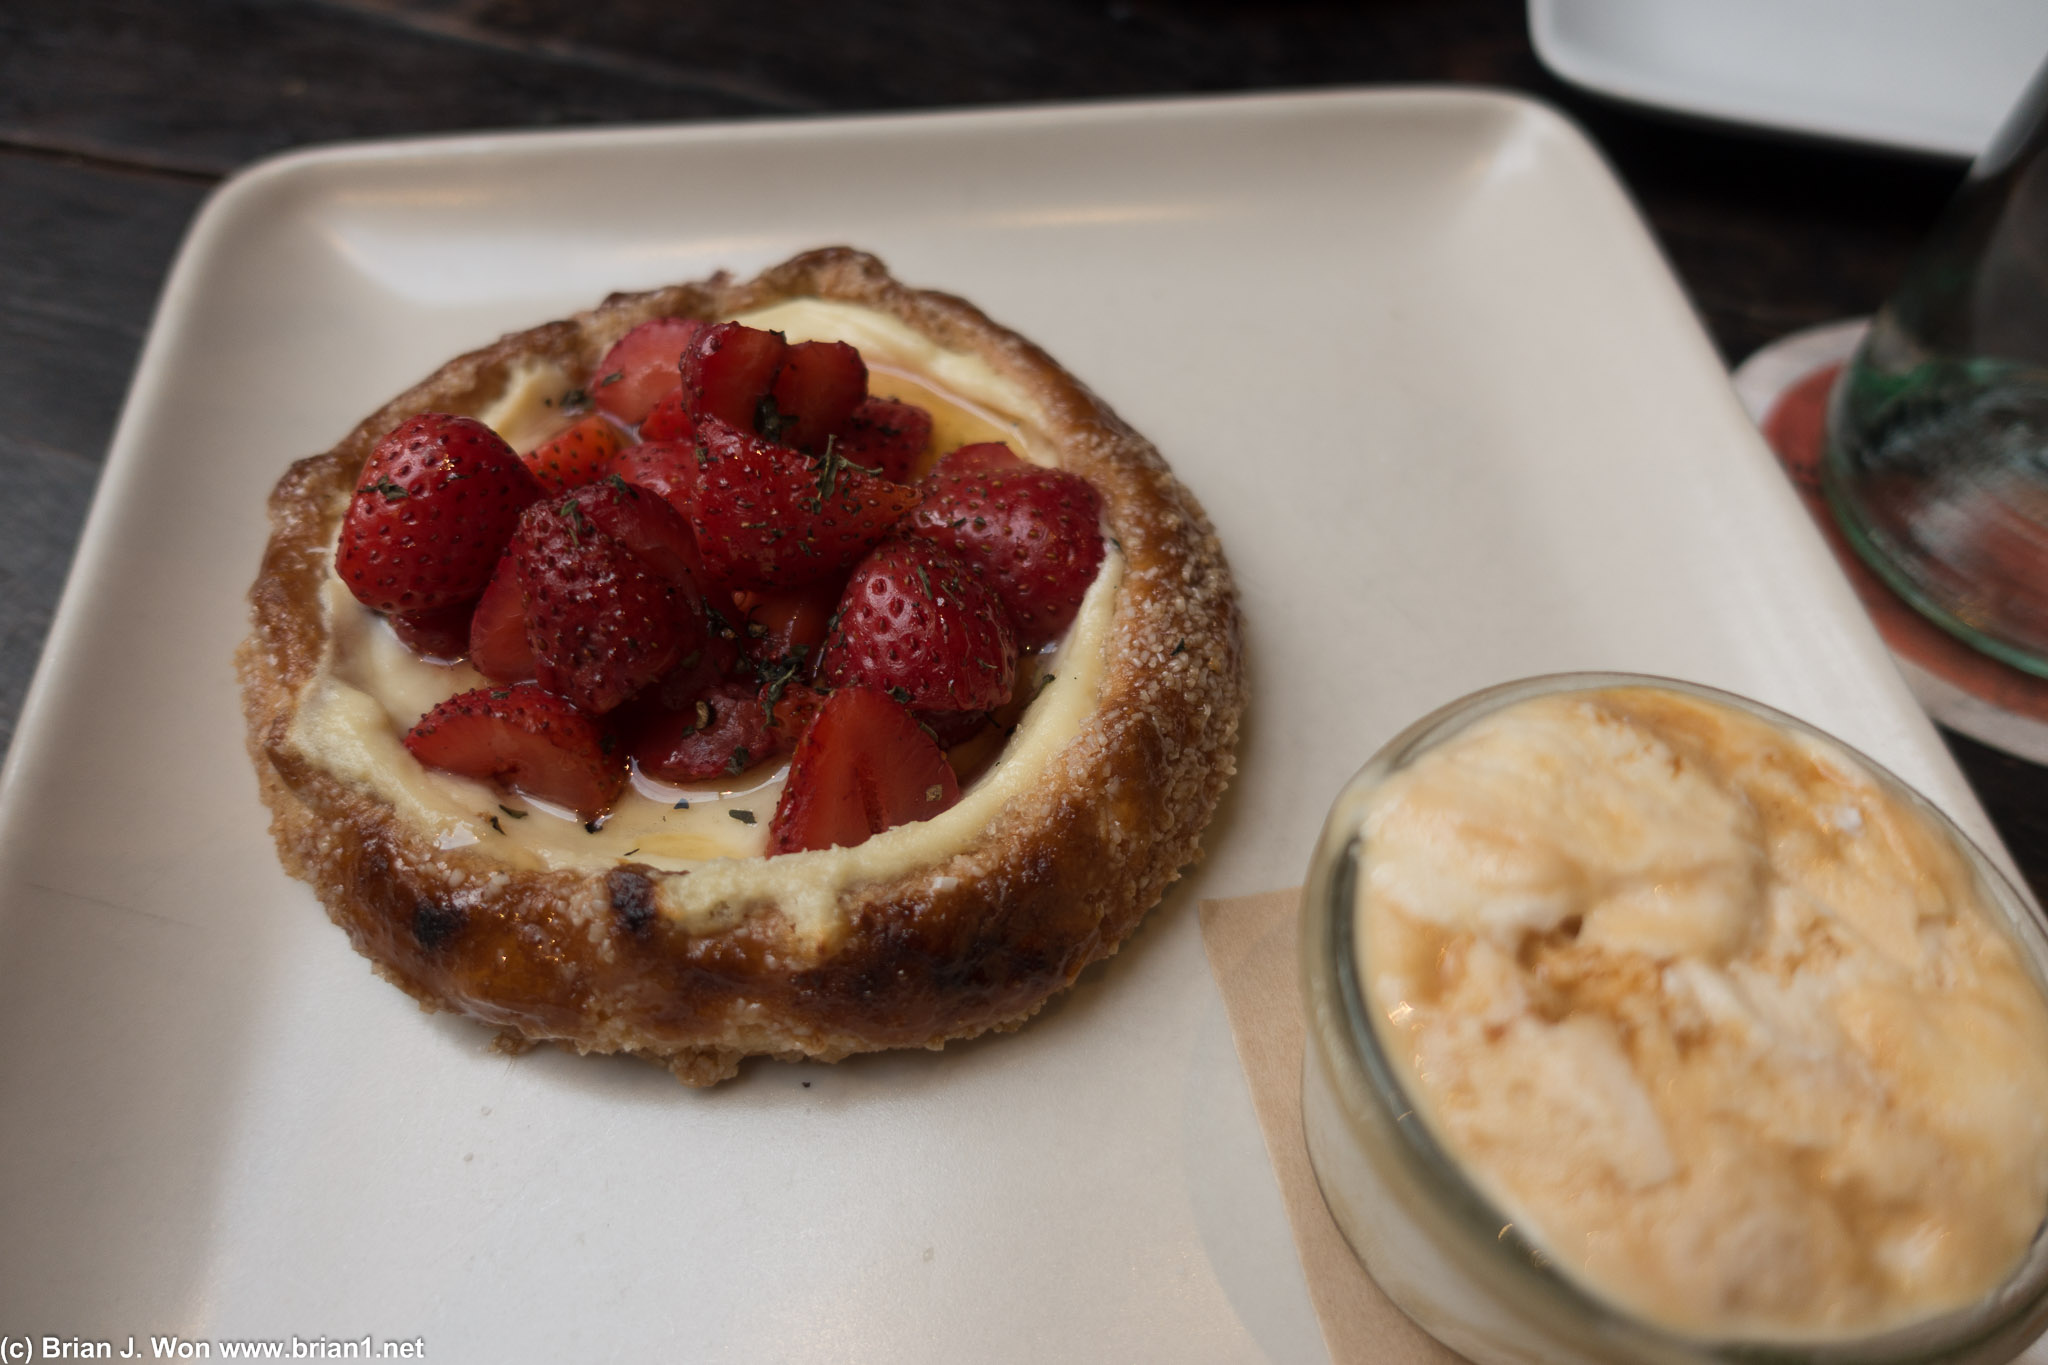 Strawberry ricotta crostata. Coworkers loved it, I was indifferent.